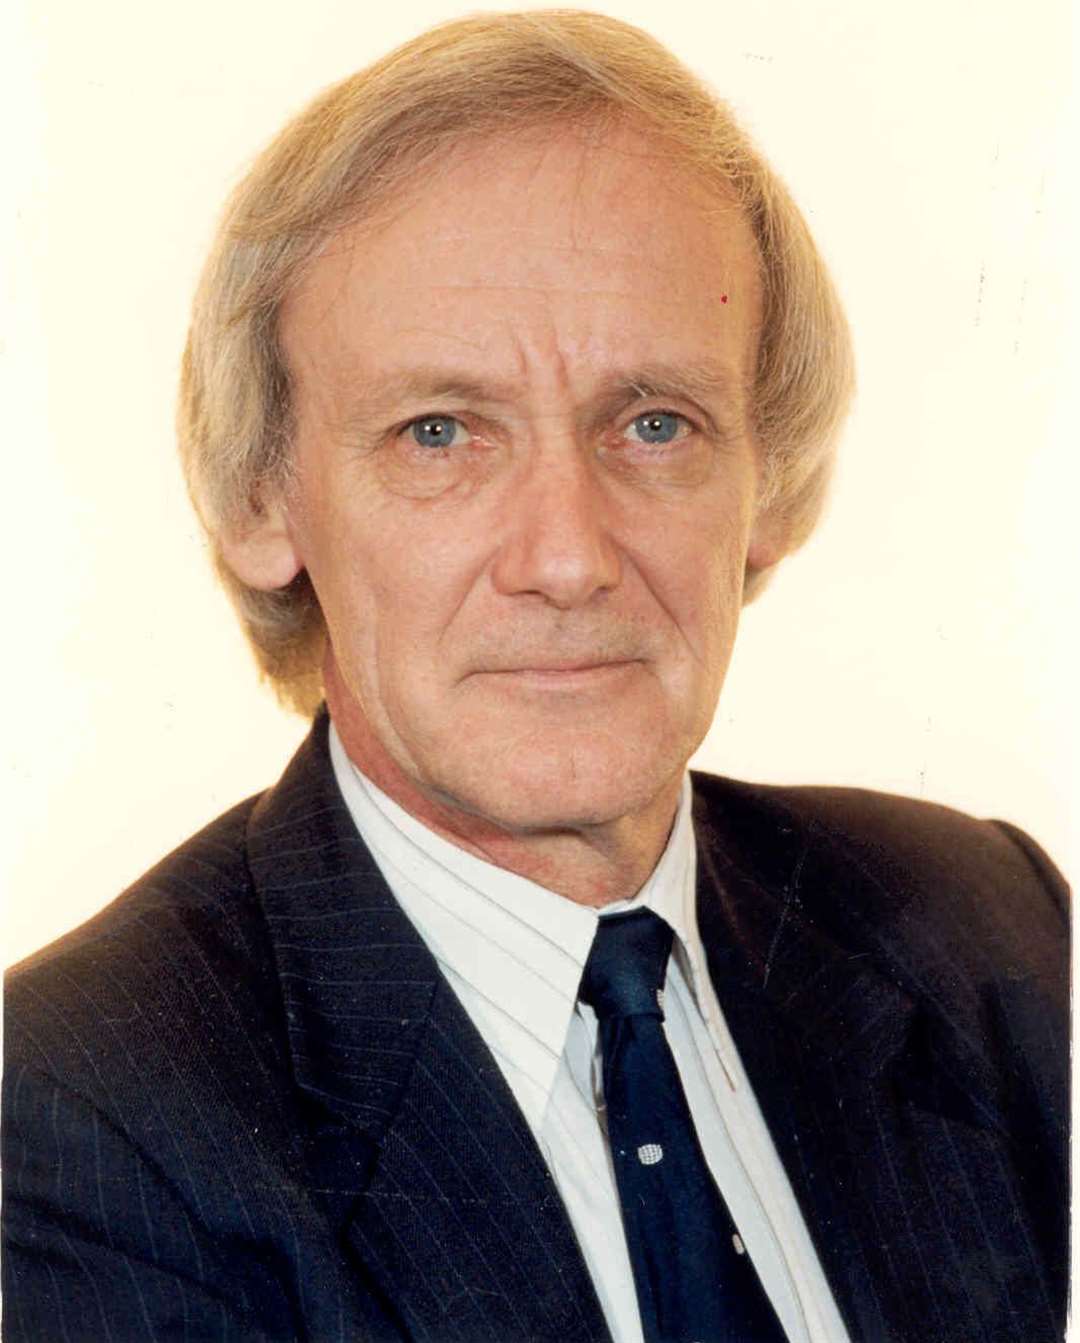 Norman Smith, pictured here in 1994, became the KM Group's managing editor and the company's legal adviser after his retirement in 2000